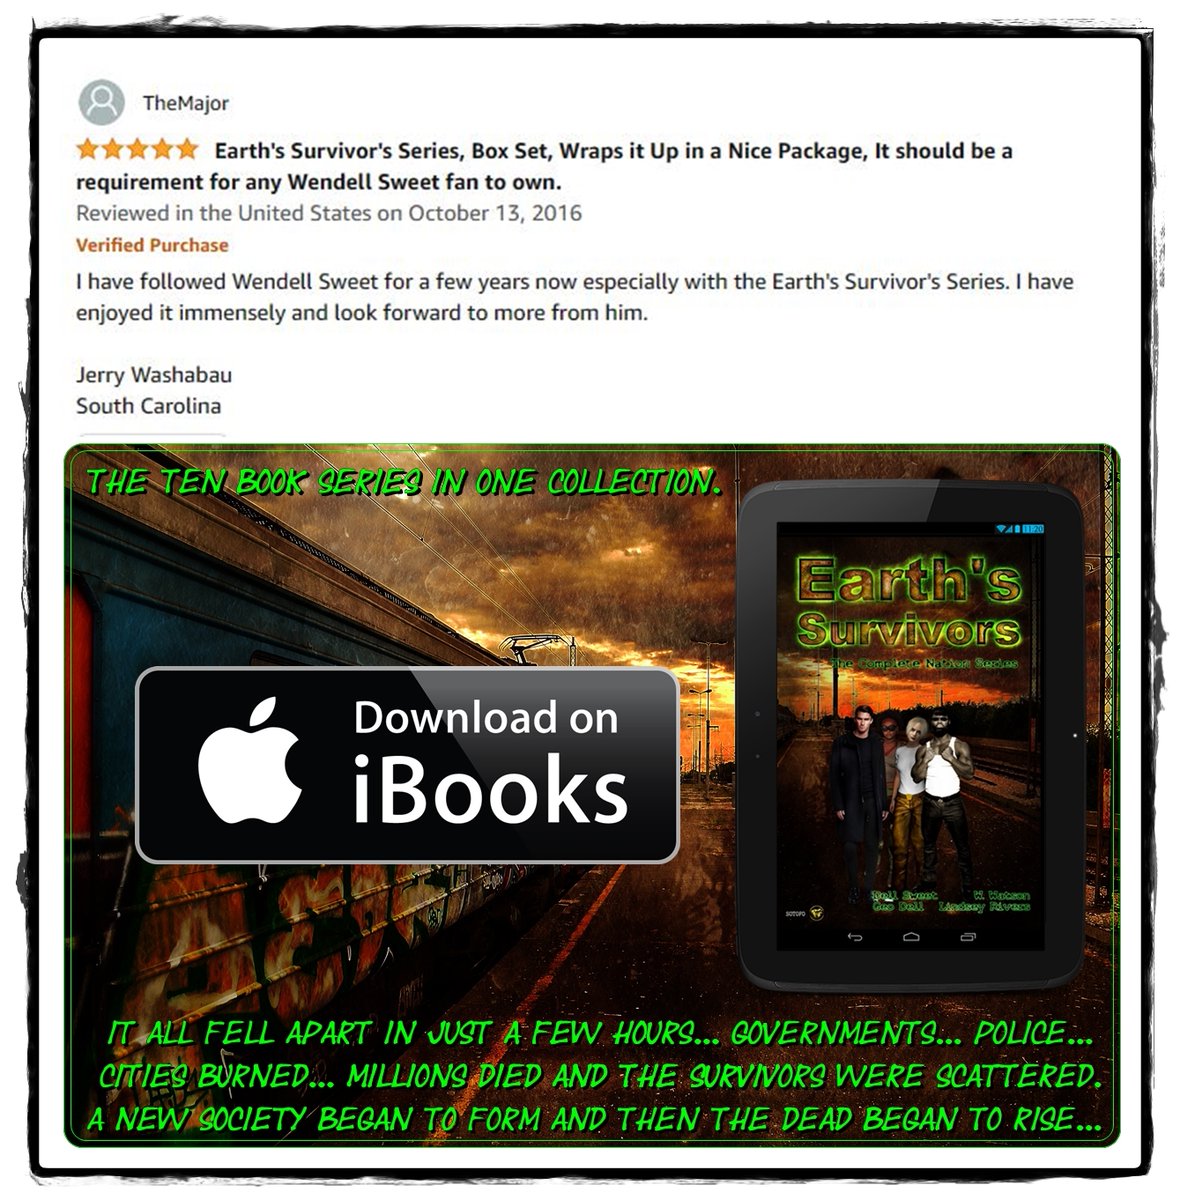 Earth's Survivors: The Nation Collection
W. W. Watson $6.99 All ten Nation Books in 1 collection! Save nearly$25.00! Every book is complete. Every book is uncut. #ApocalypticFiction #Horror #EndOfTheWorld #Apple #Readers #BookLovers #BookWorm #BookDeals 1l.ink/PLV4JGW